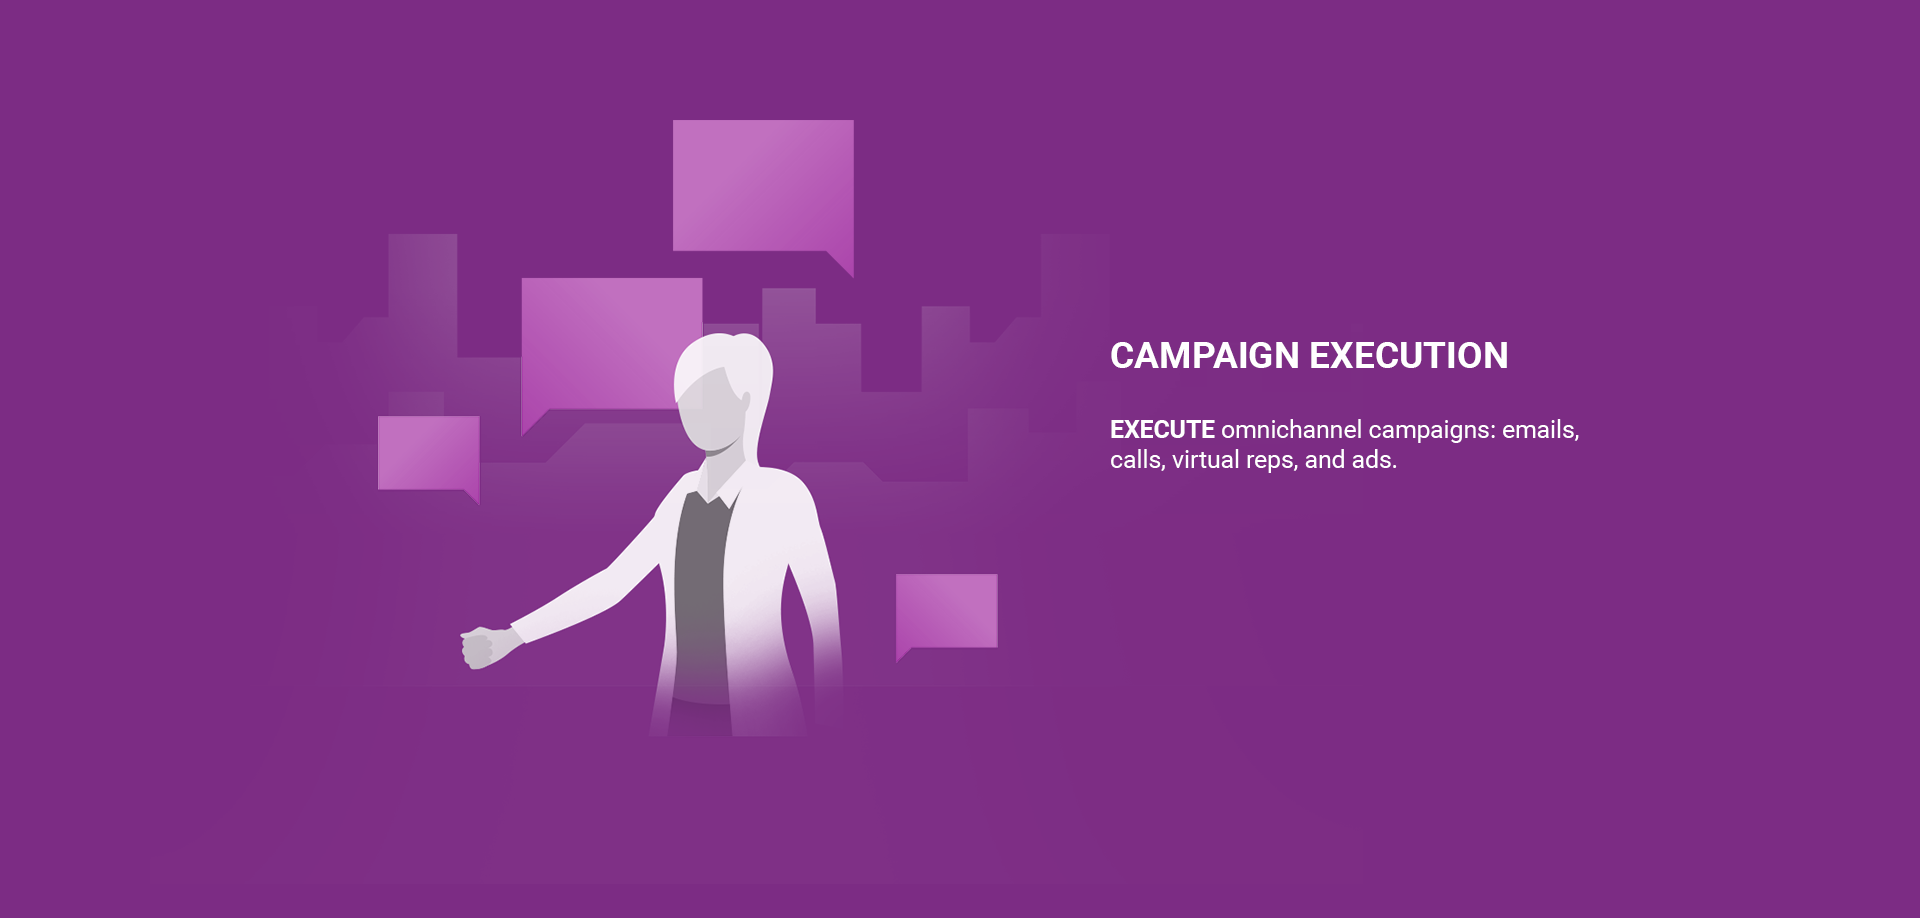 Silhouette of an individual amidst blocks and structures, highlighting the theme "CAMPAIGN EXECUTION."